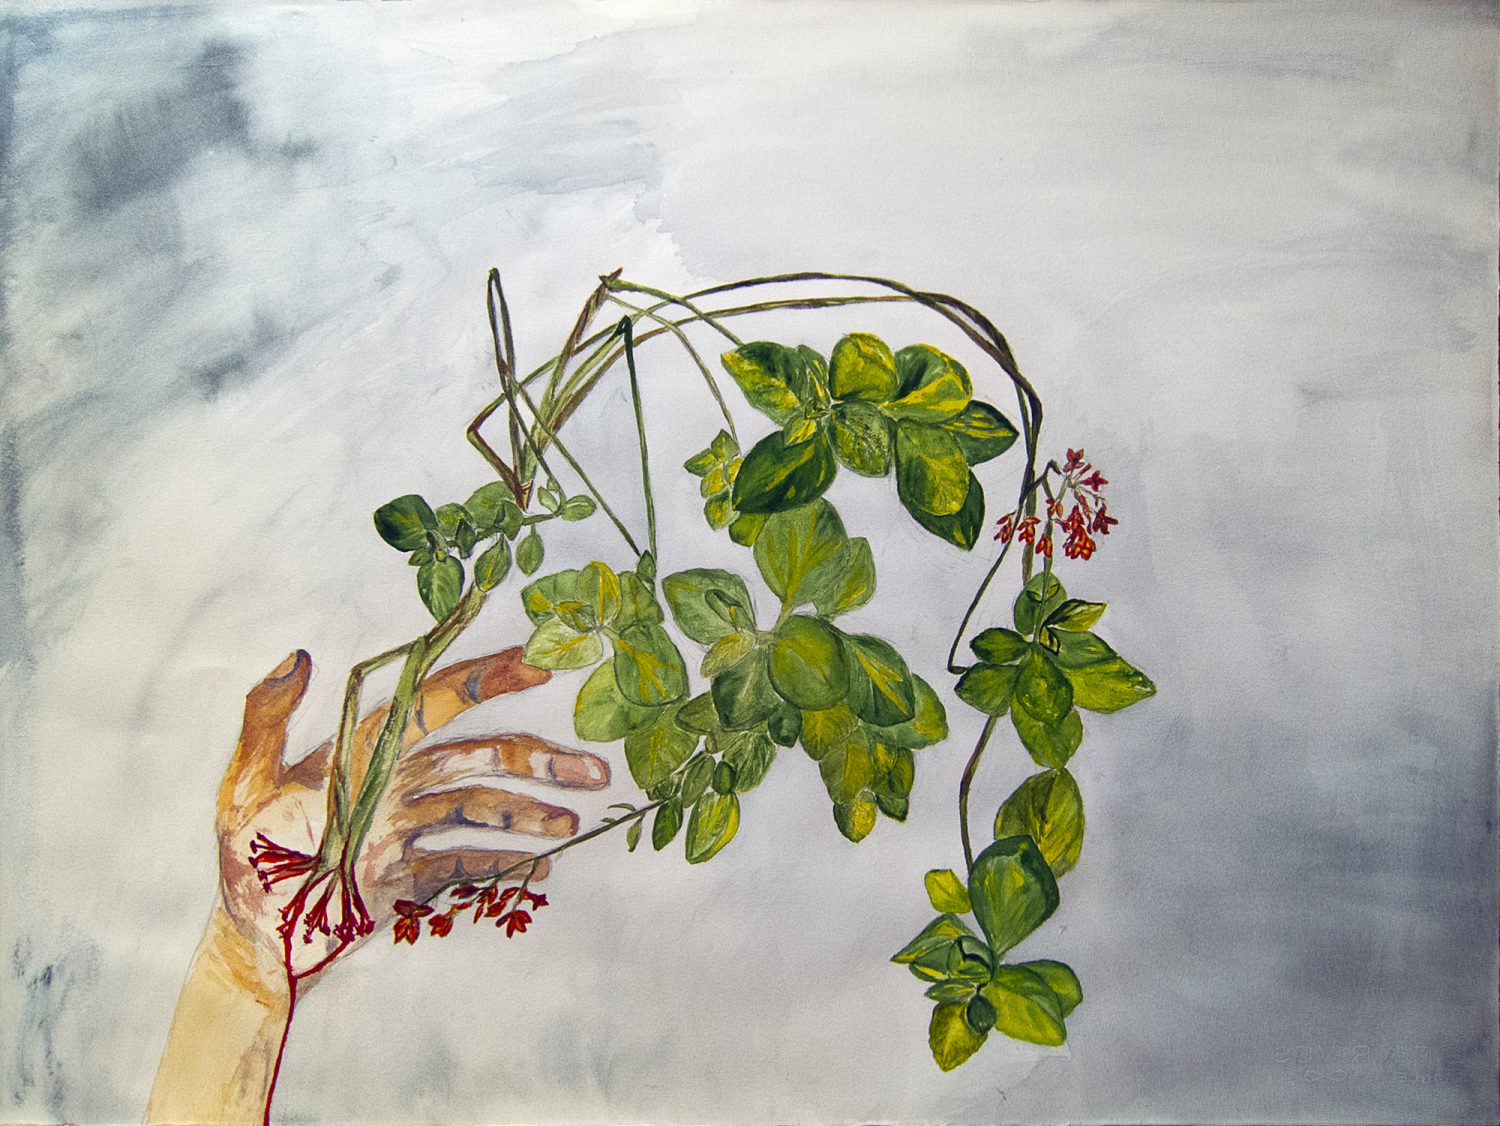 Paining of a Plant coming out of a Bloody Hand